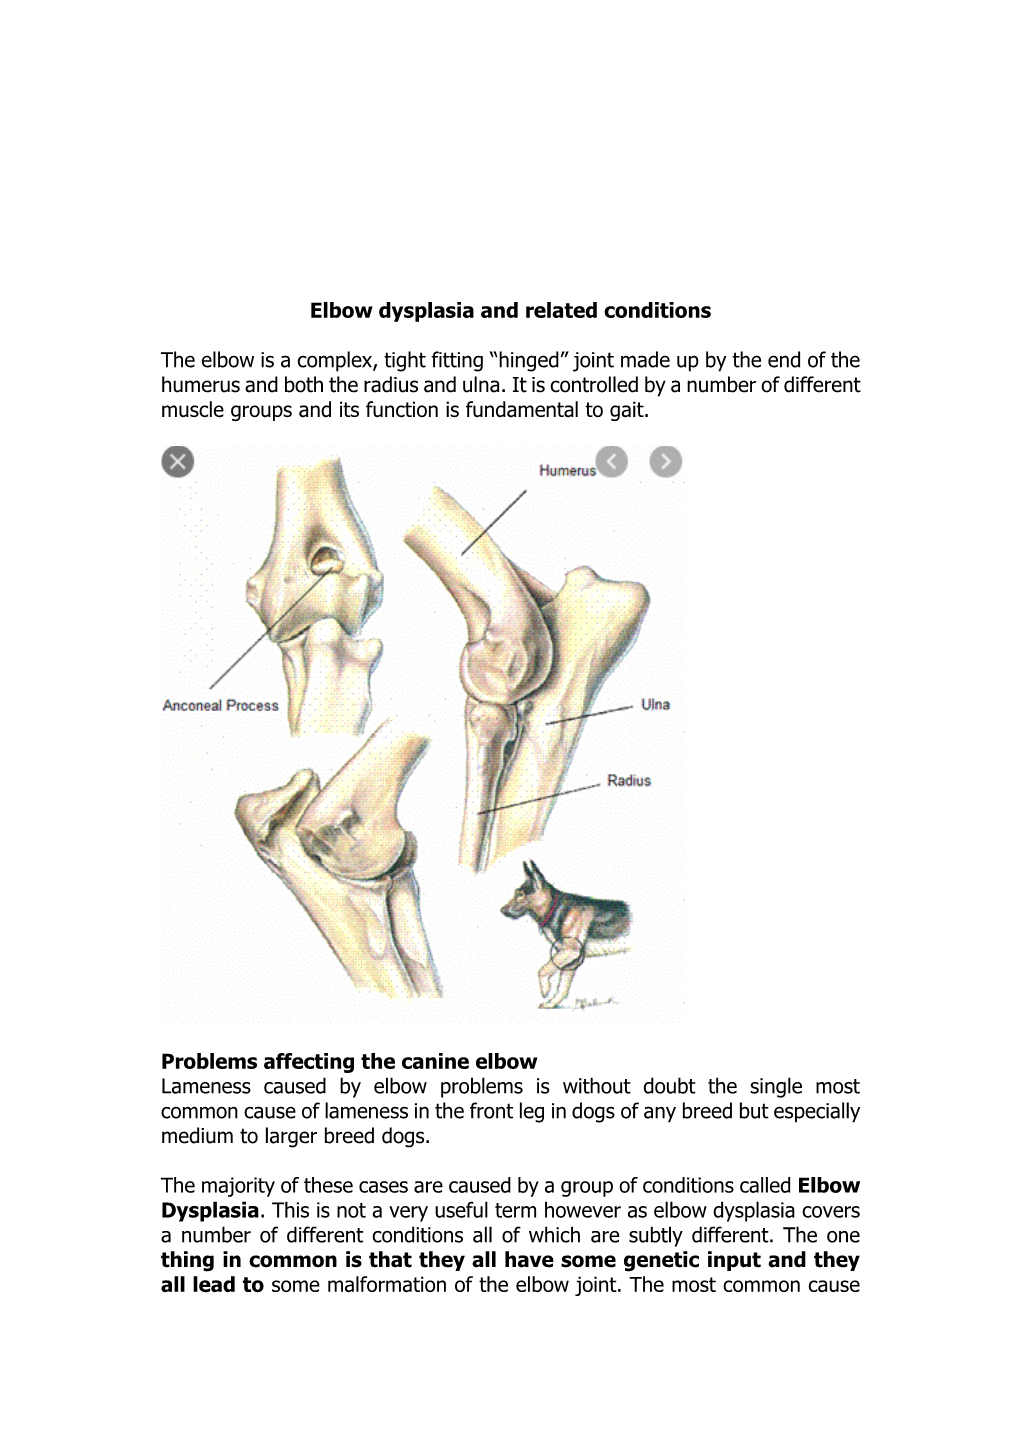 Elbow Dysplasia and Related Conditions